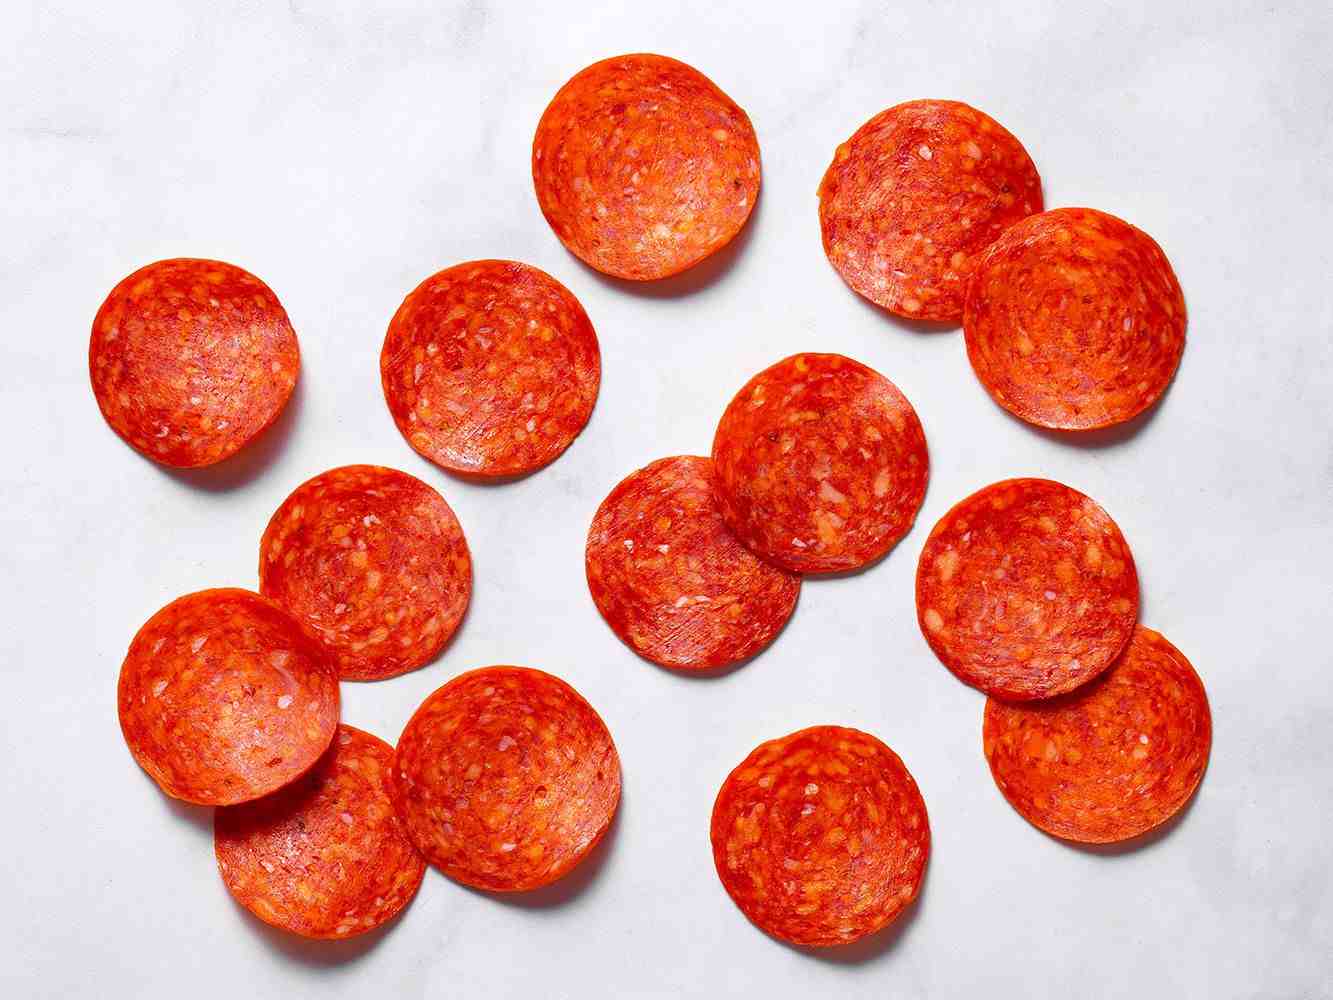 What is a plant-based pepperoni?